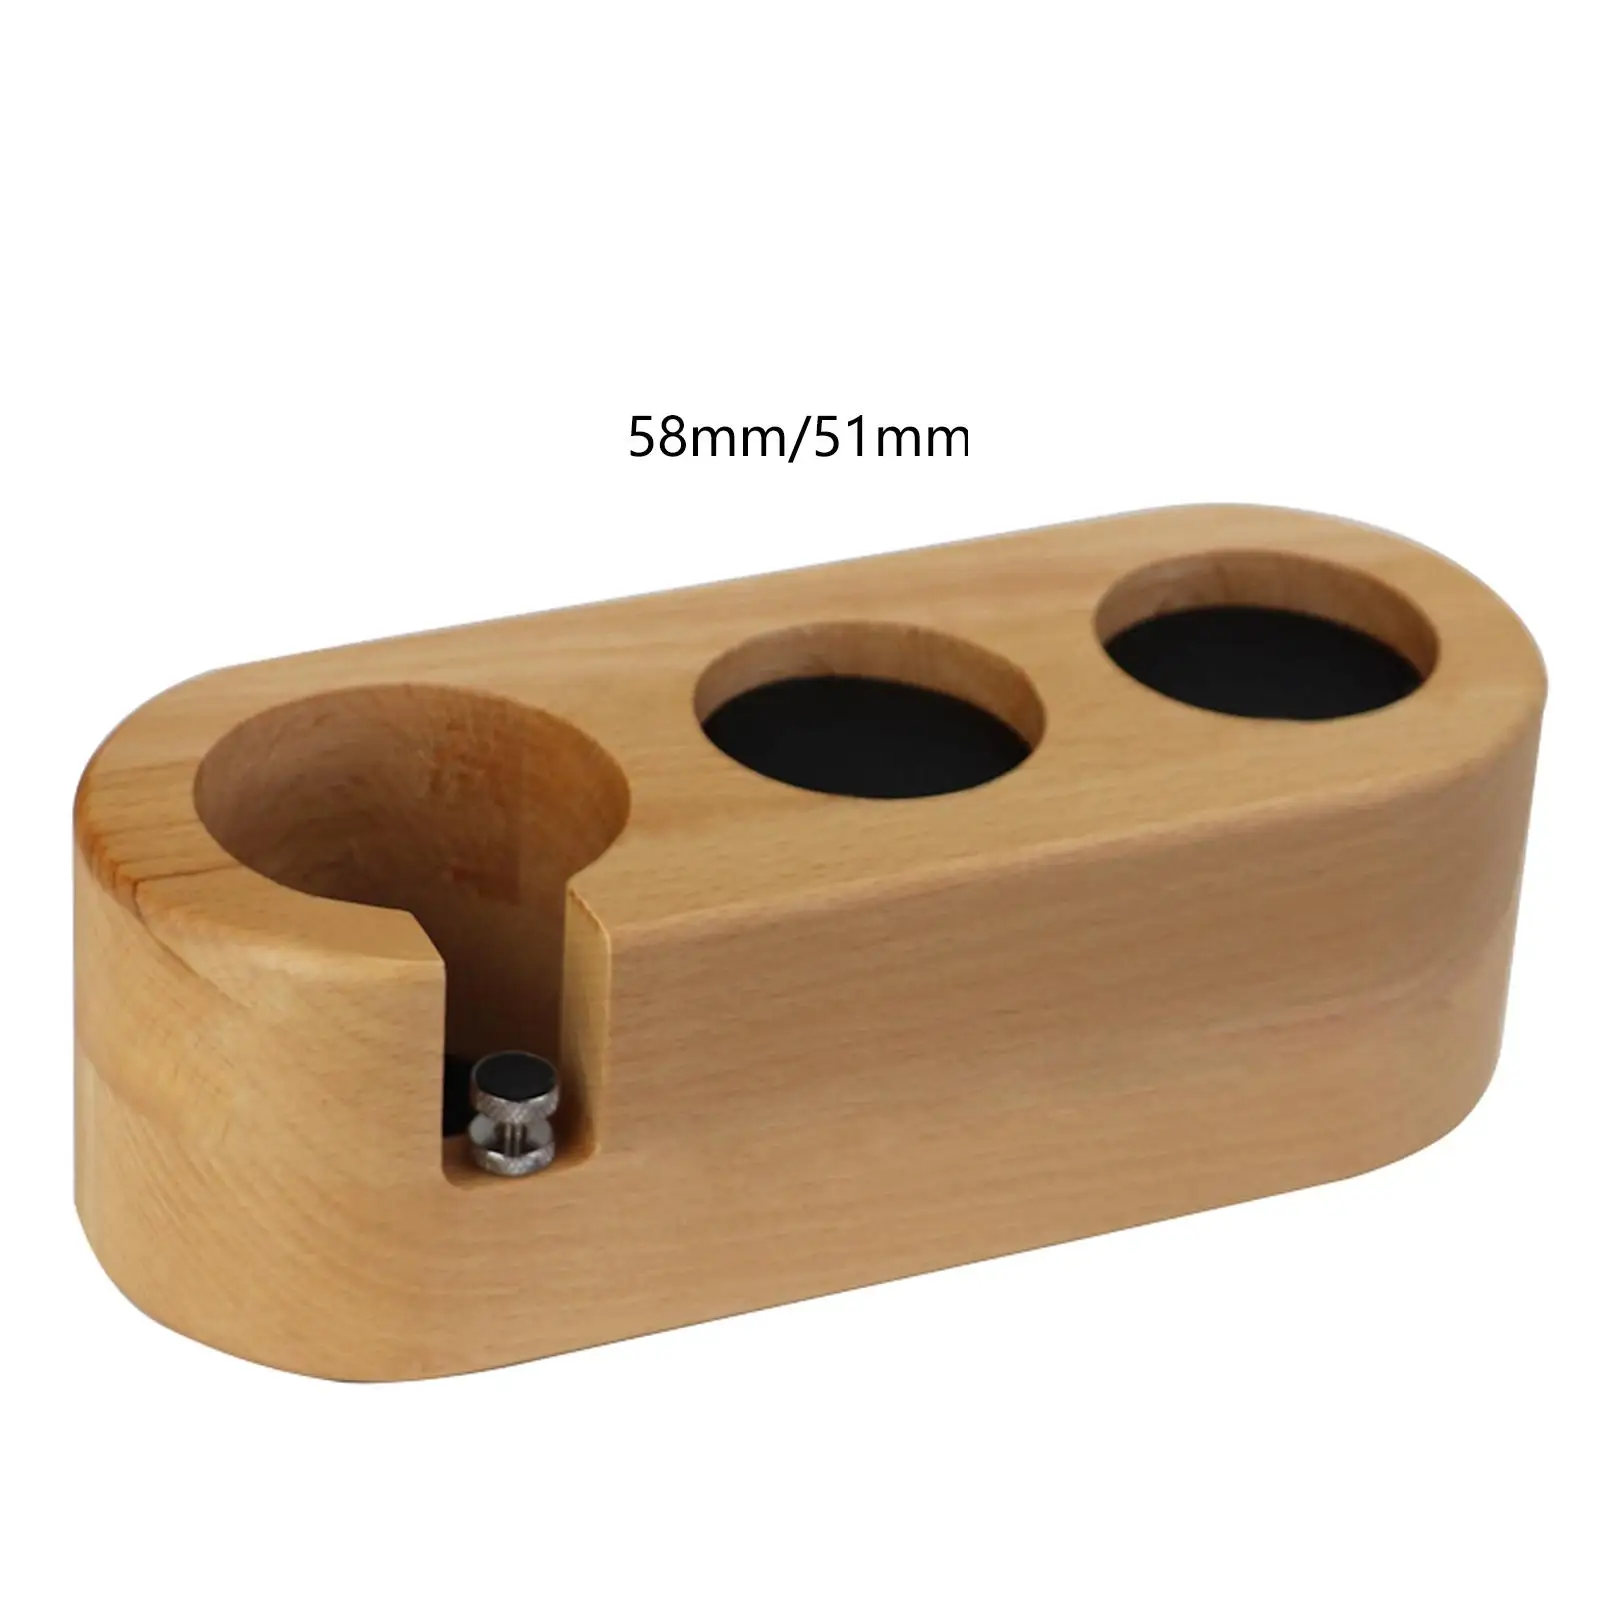 Coffee Tamper Stand Anti Skid Pads Coffee Accessories Adjustable Multi Hole Coffee Tamper Holder for Coffee Maker Barista Bar